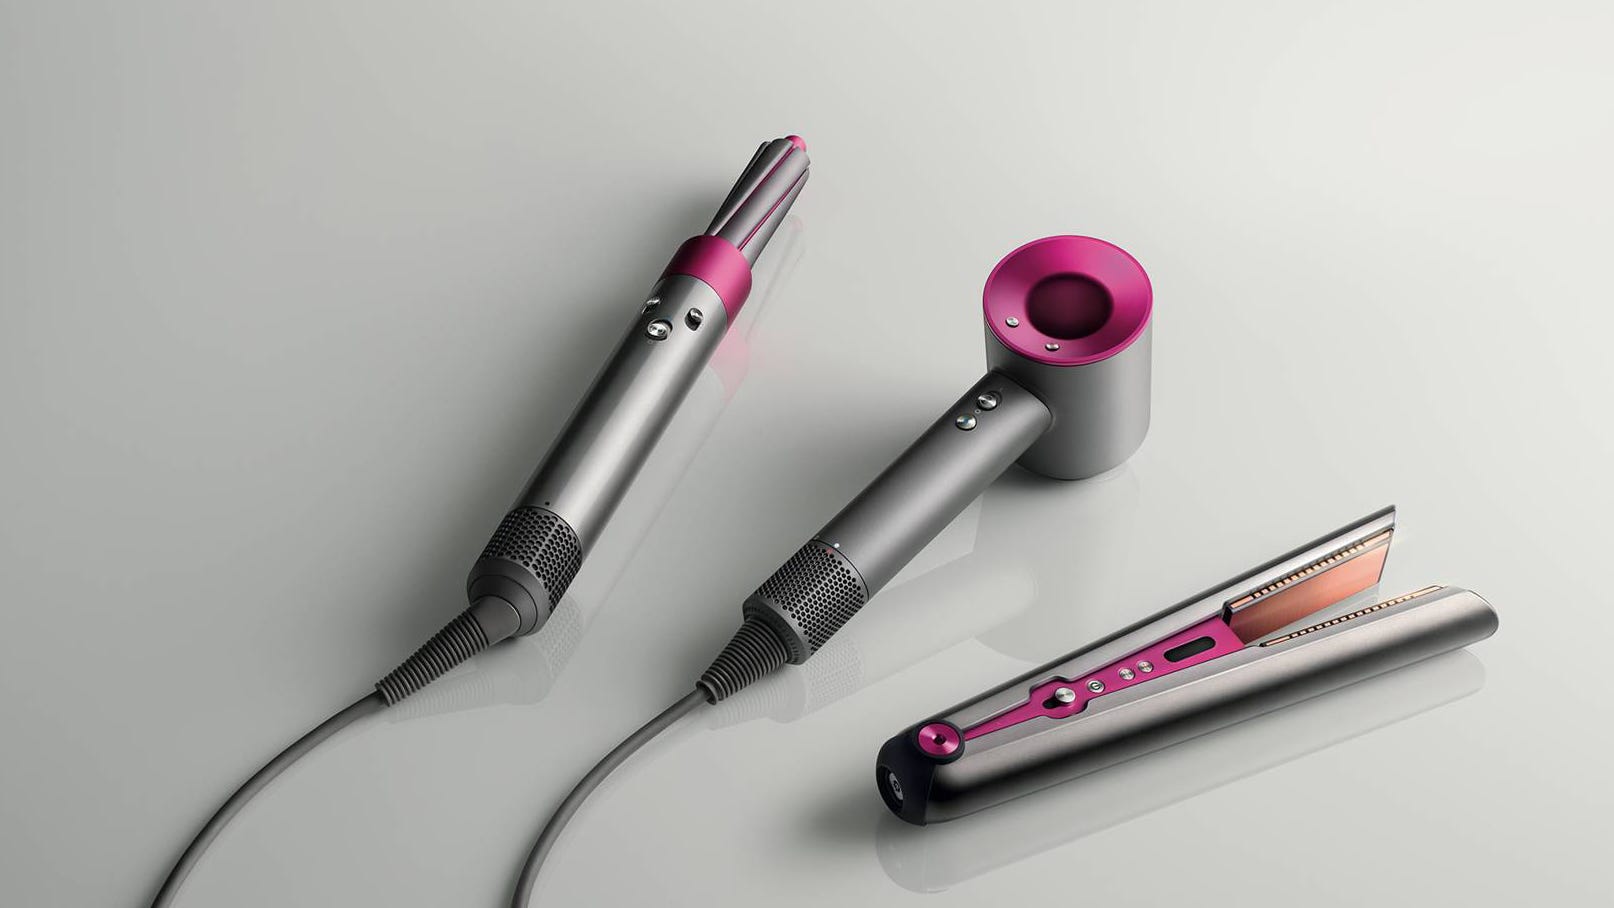 Dyson Airwrap: Save on this curling wand and the Dyson Supersonic hair